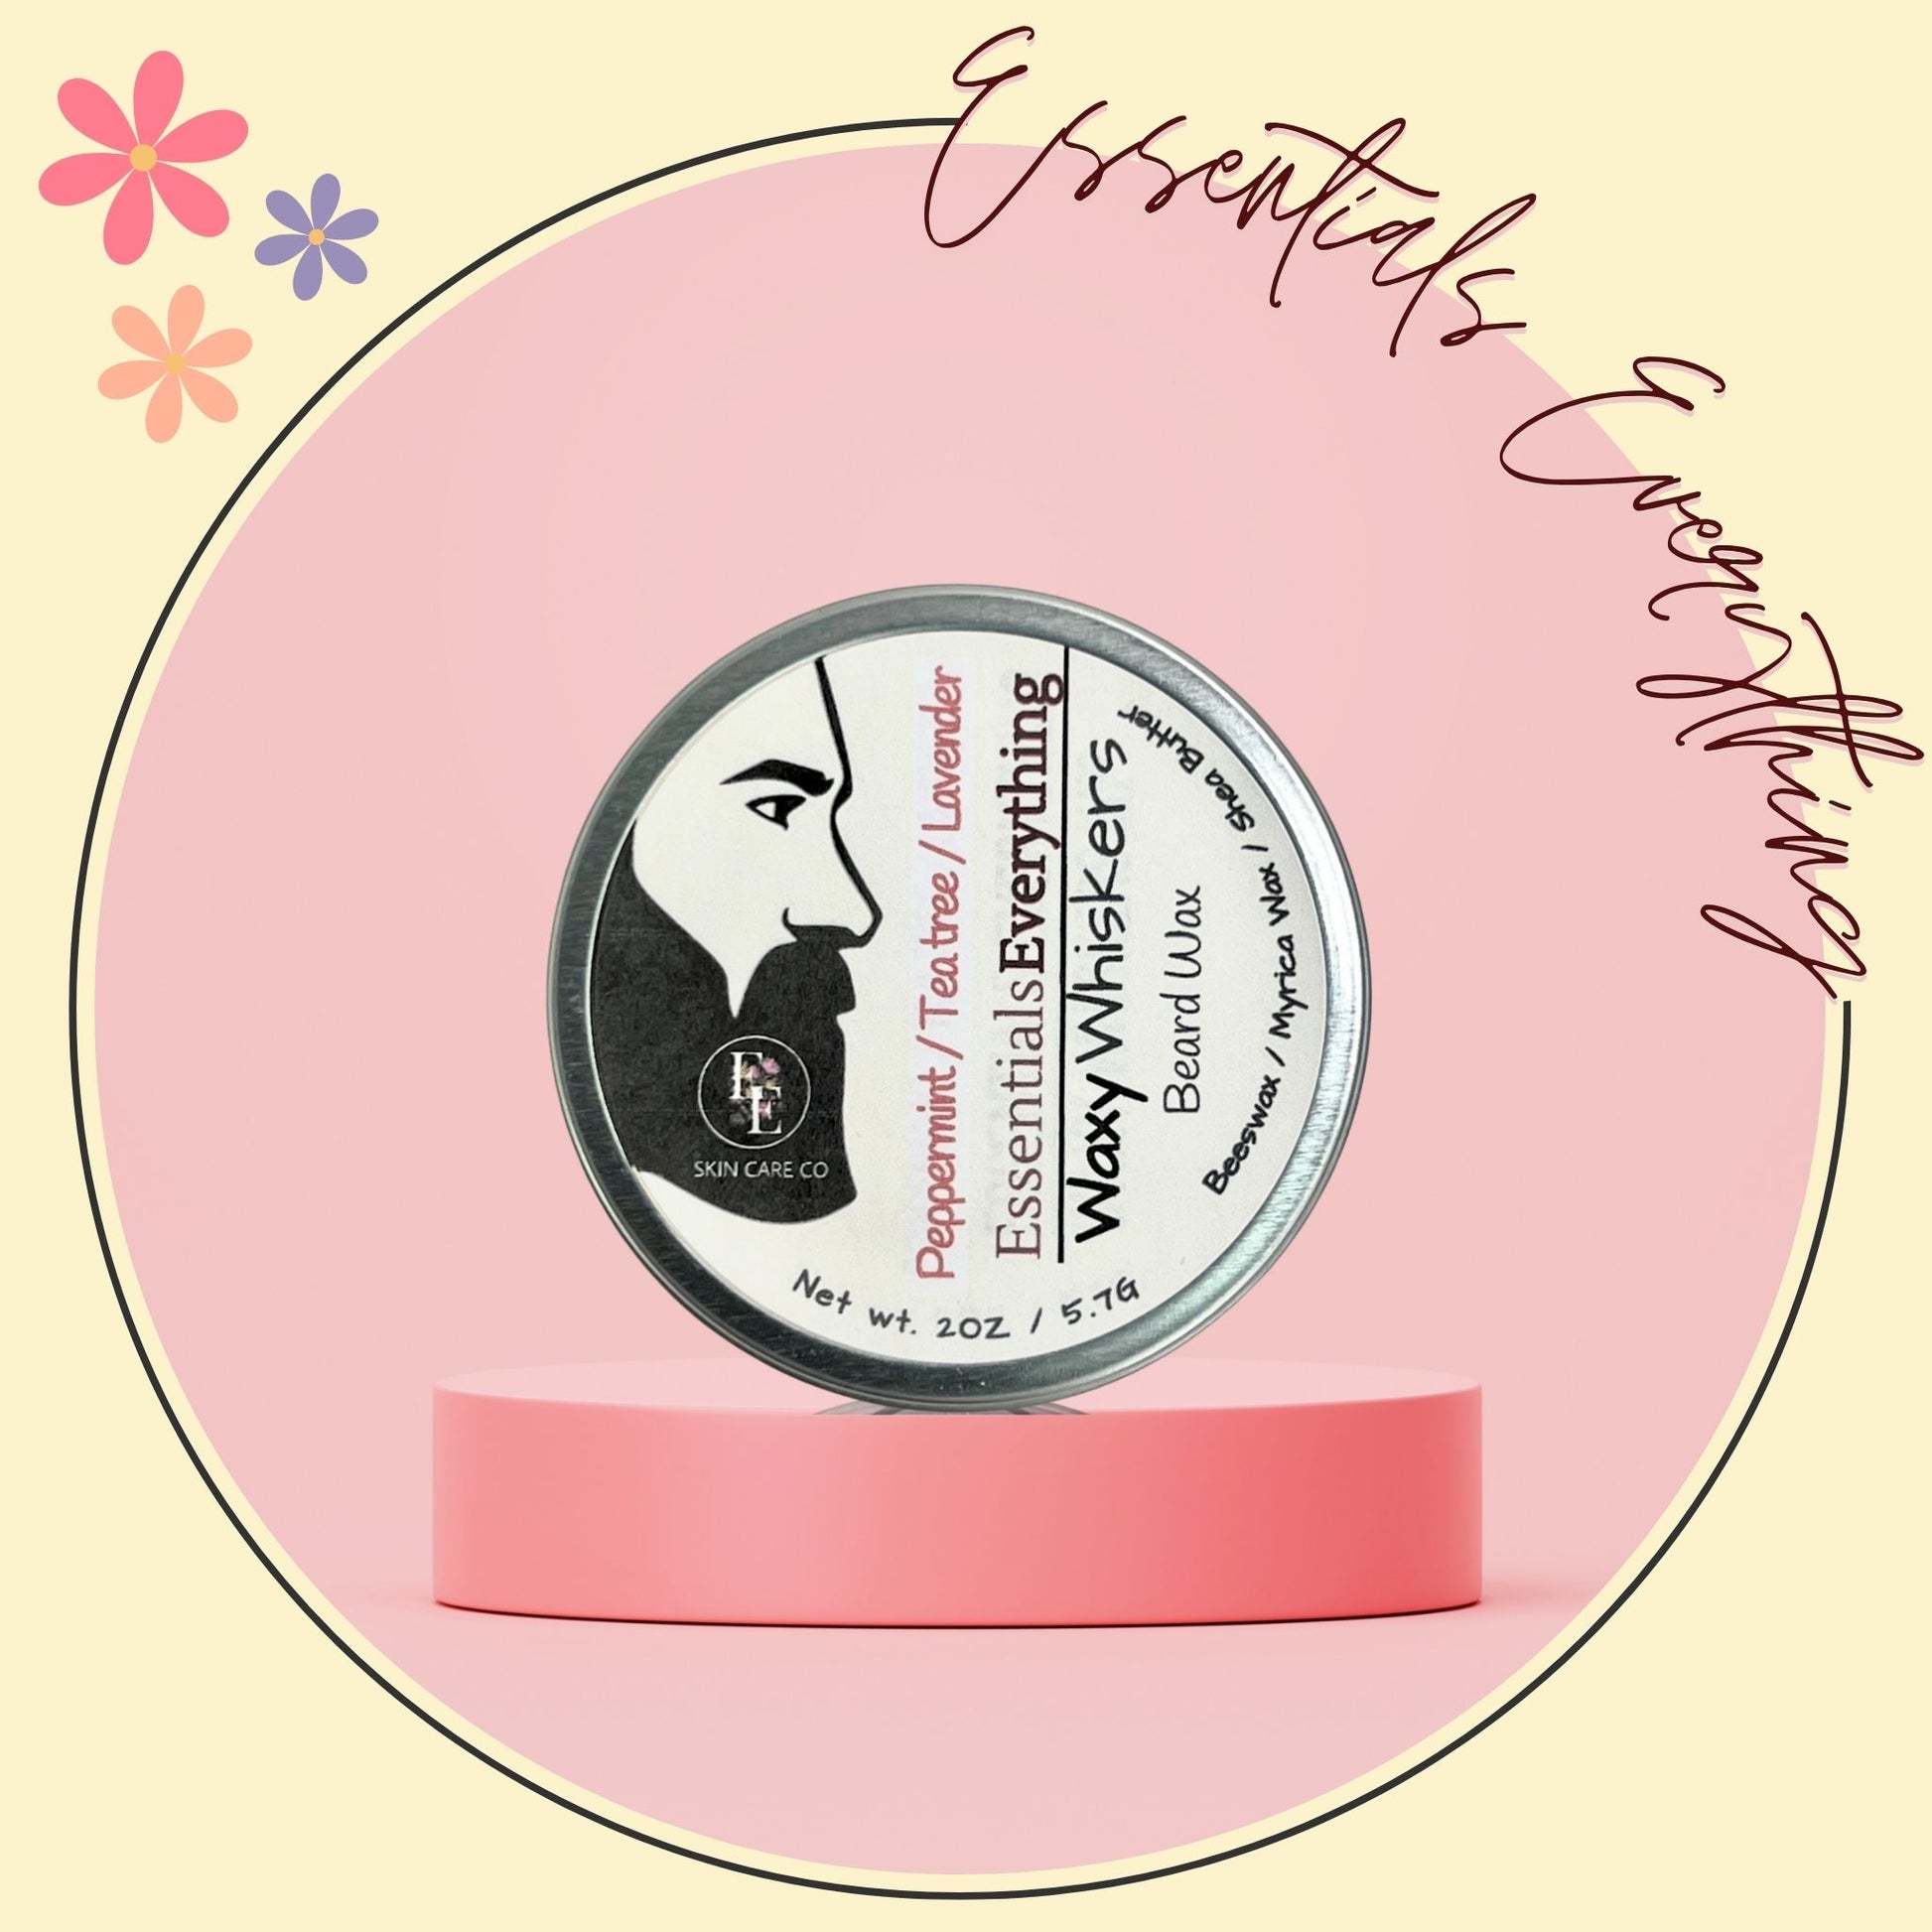 Waxy  Whiskers - All Natural Beard Wax from Essentials Everything Skin Care Co. Peppermint/Lavender/Tea Tree 1 oz.